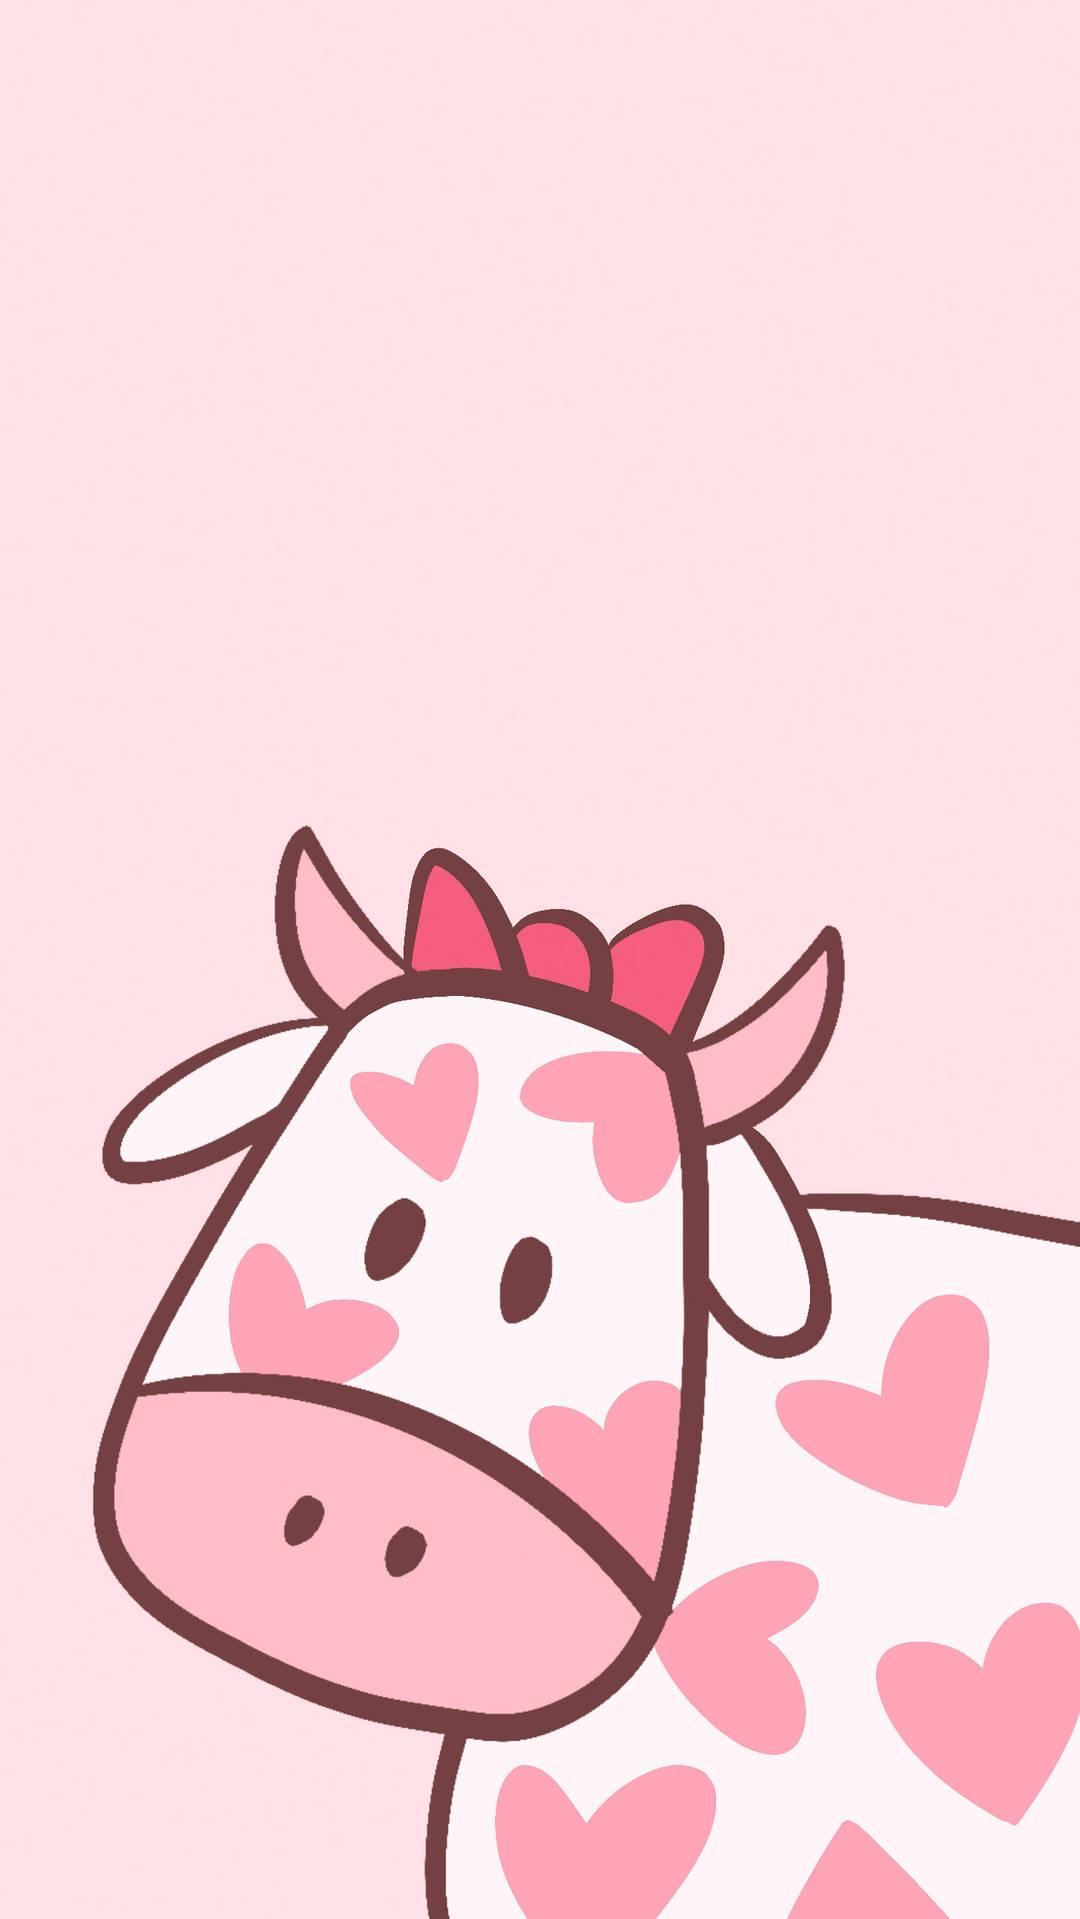 A Delightful Strawberry Cow Adorned With Dainty Ribbon